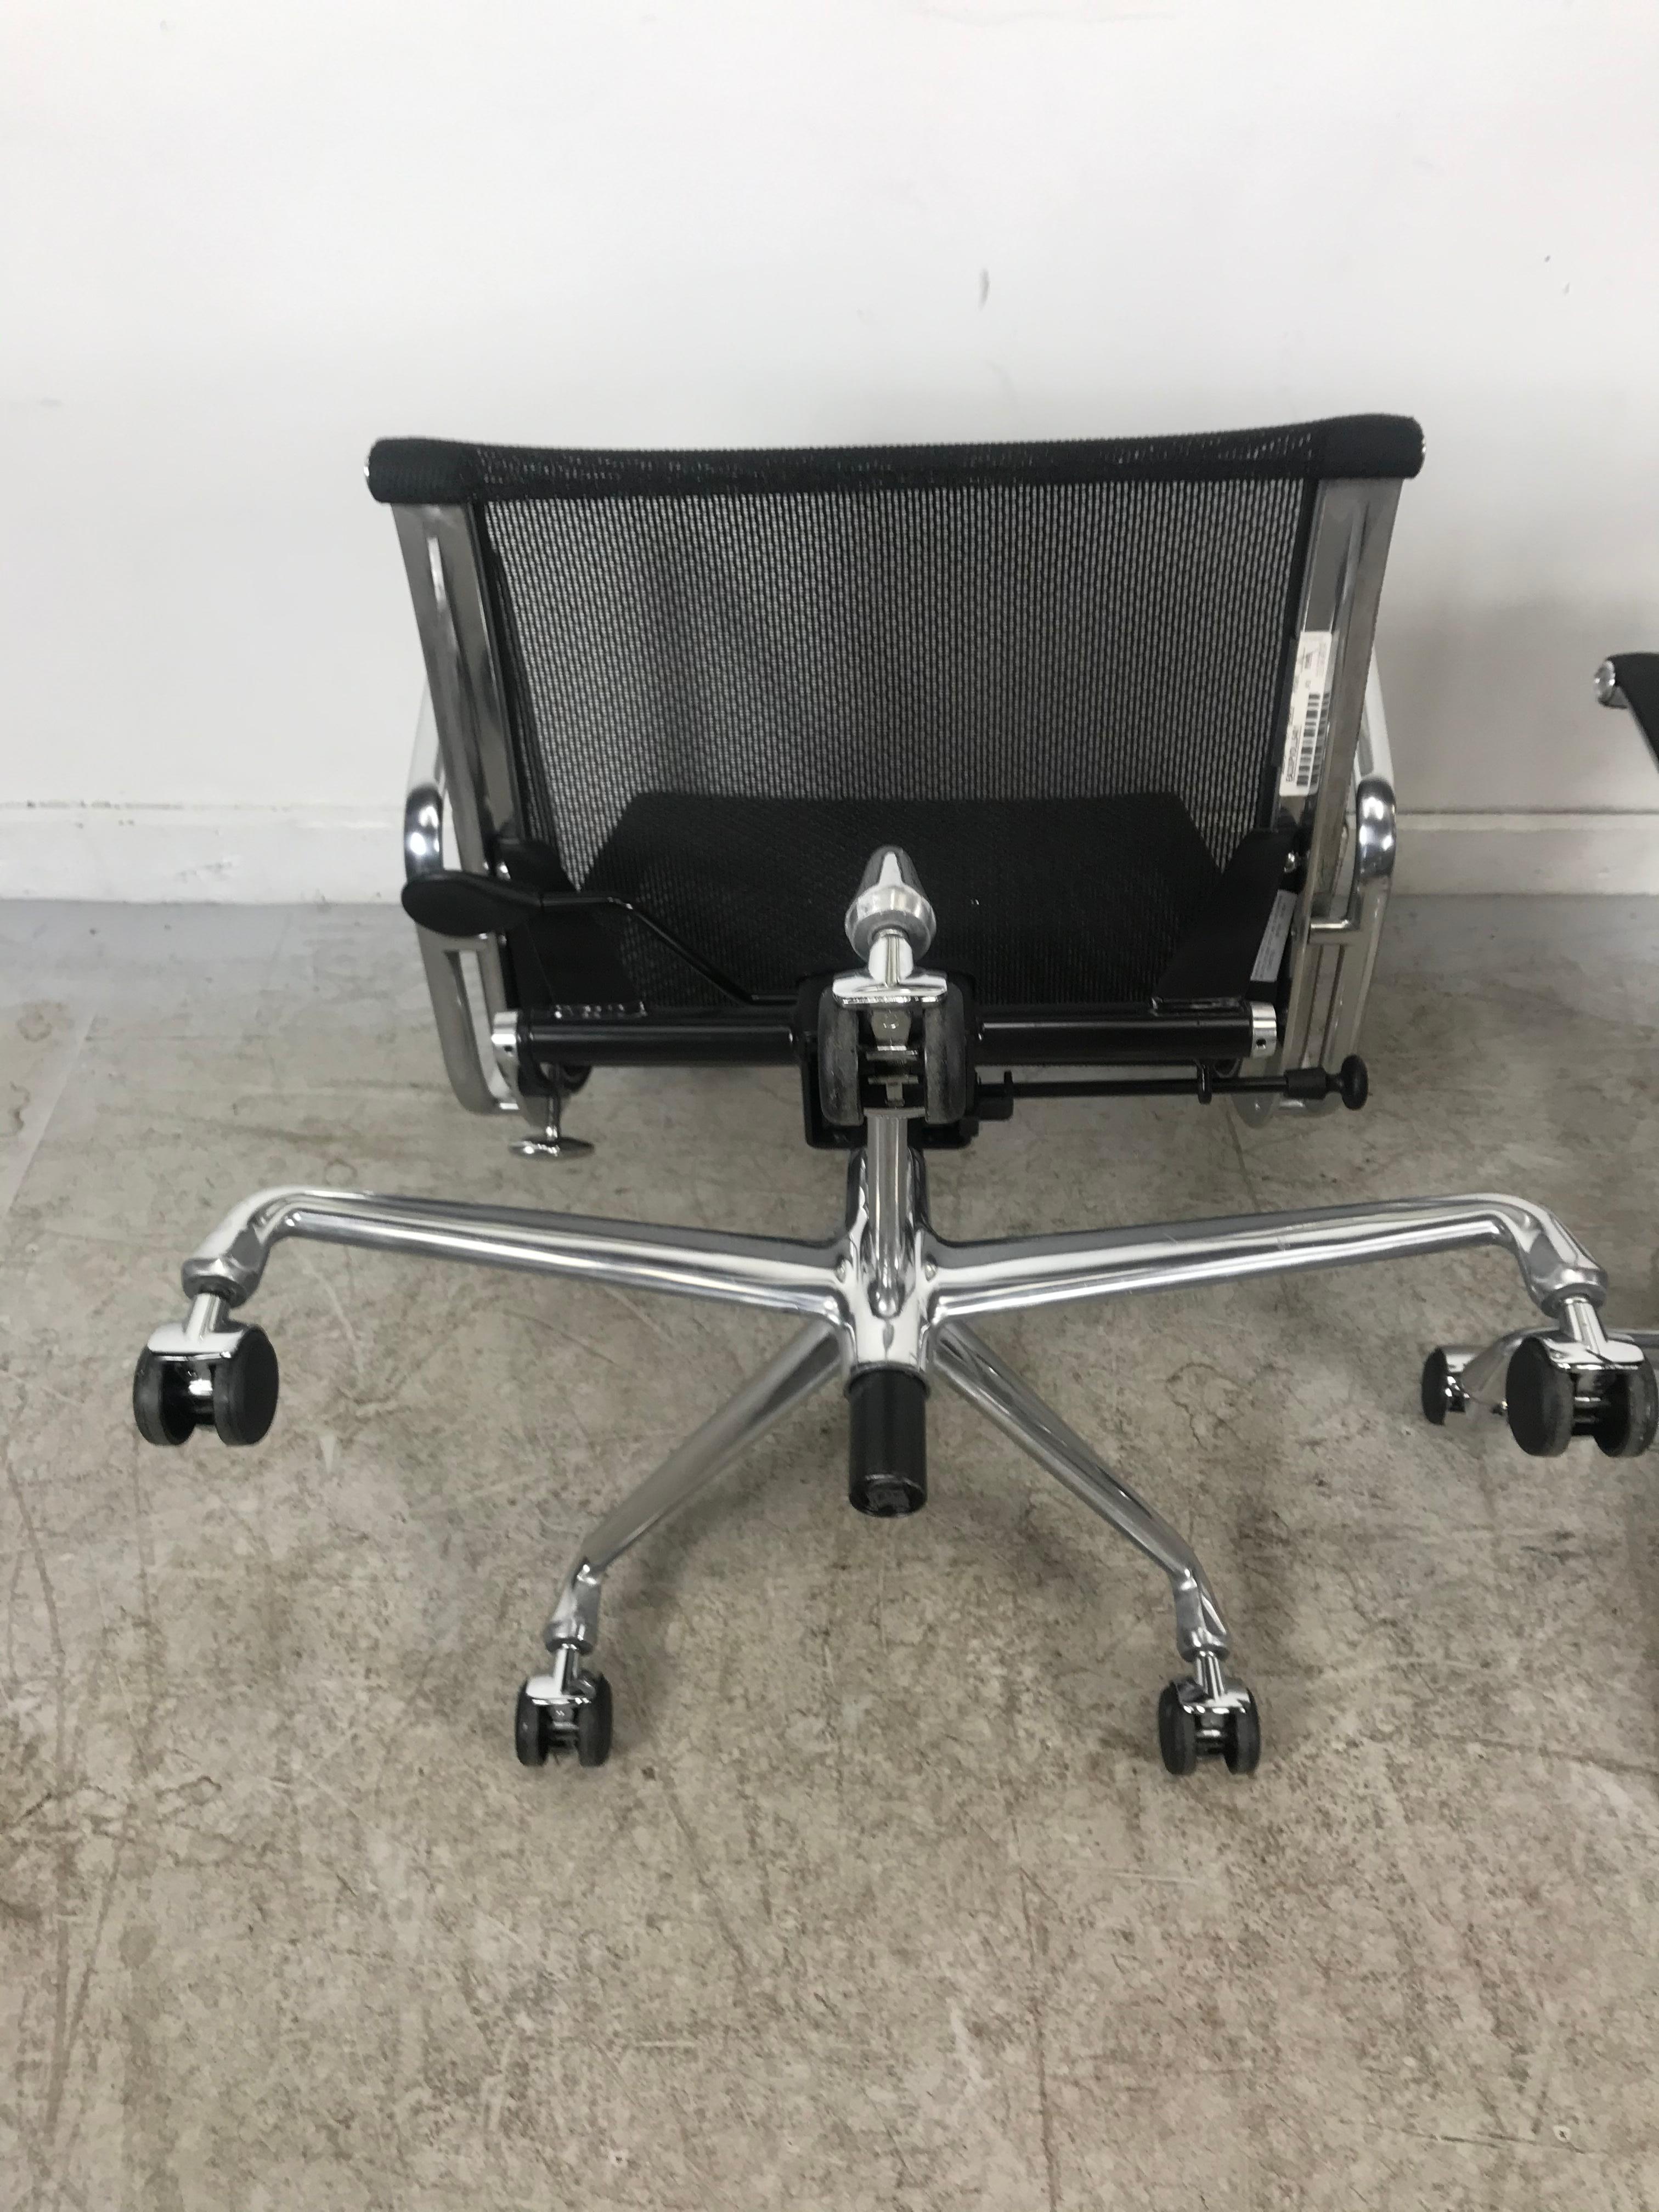 Classic Charles and Ray Eames Aluminum Group mesh task chair, conference room, manufactured by Herman Miller, Classic Modernist Design. Chair features hydraulic height adjustment, tilt, swivel. Five star base with casters. Original Charles Eames